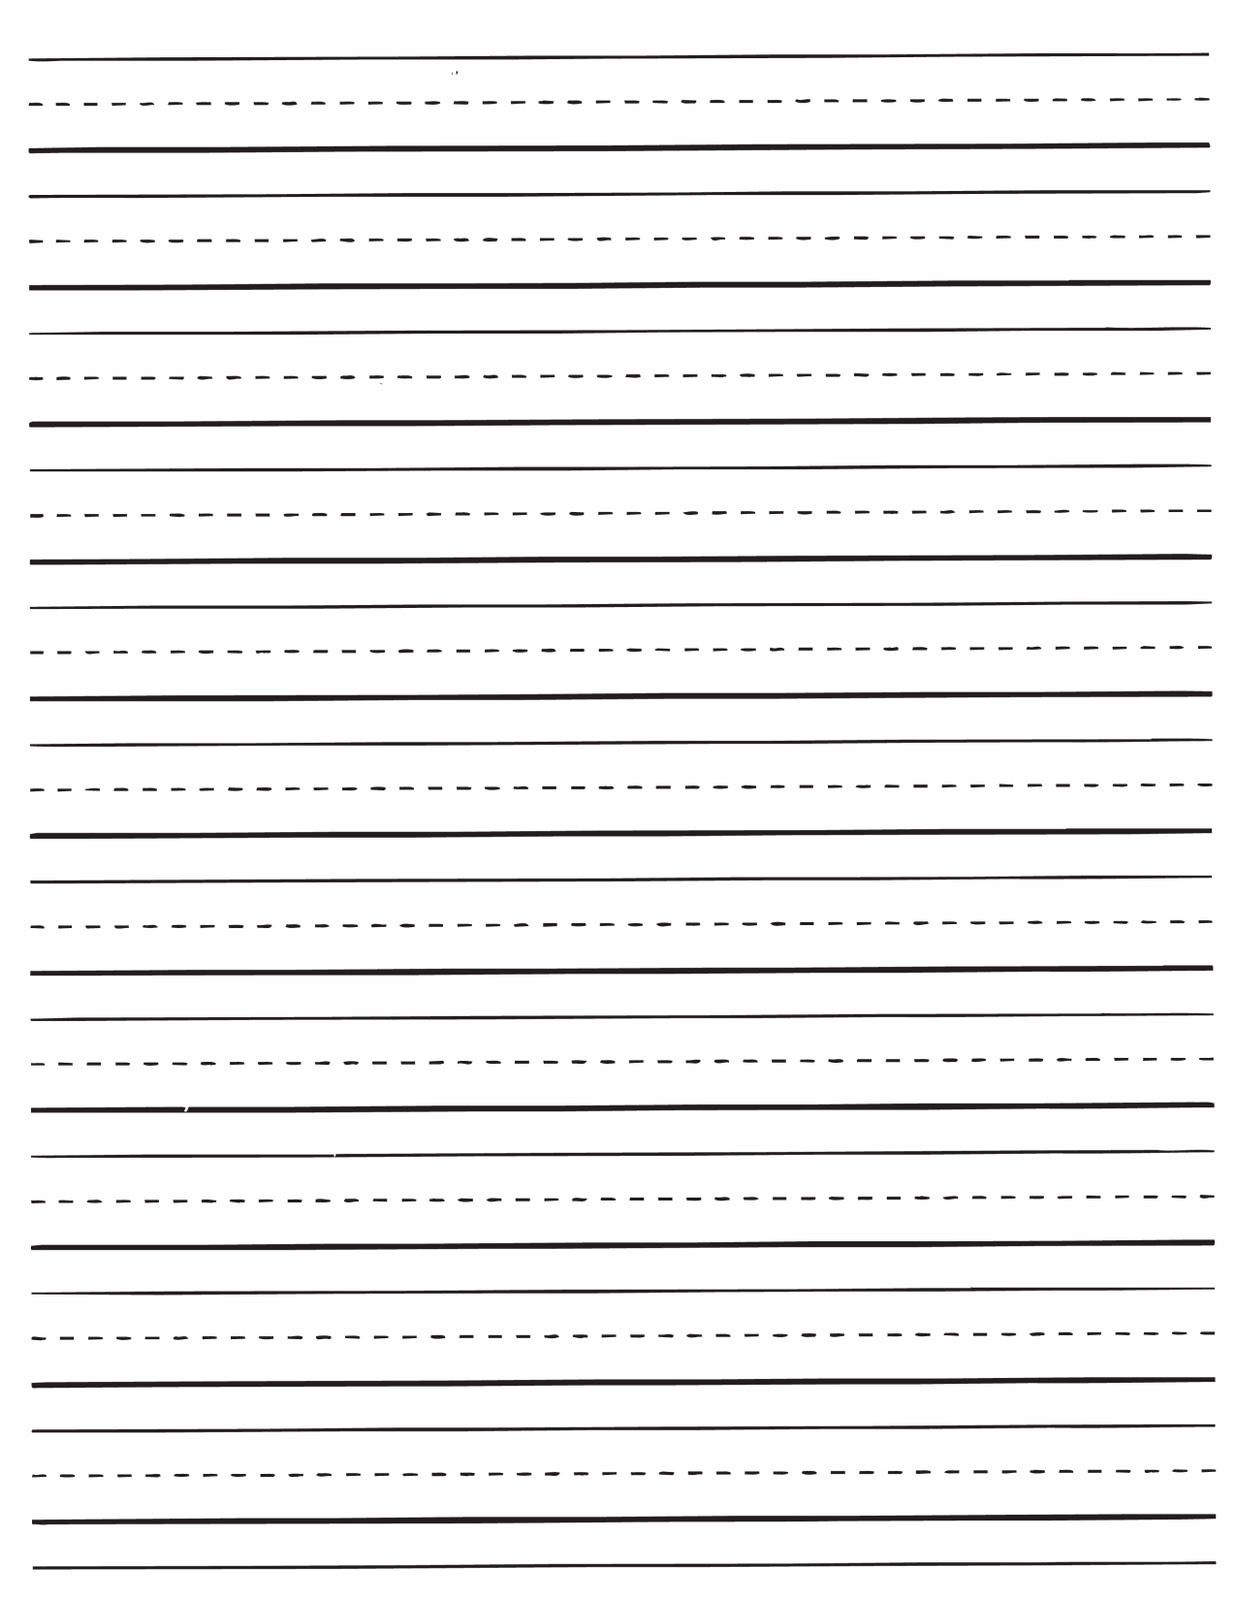 Printable Lined Paper For Kids | World Of Label - Free Printable Lined Paper